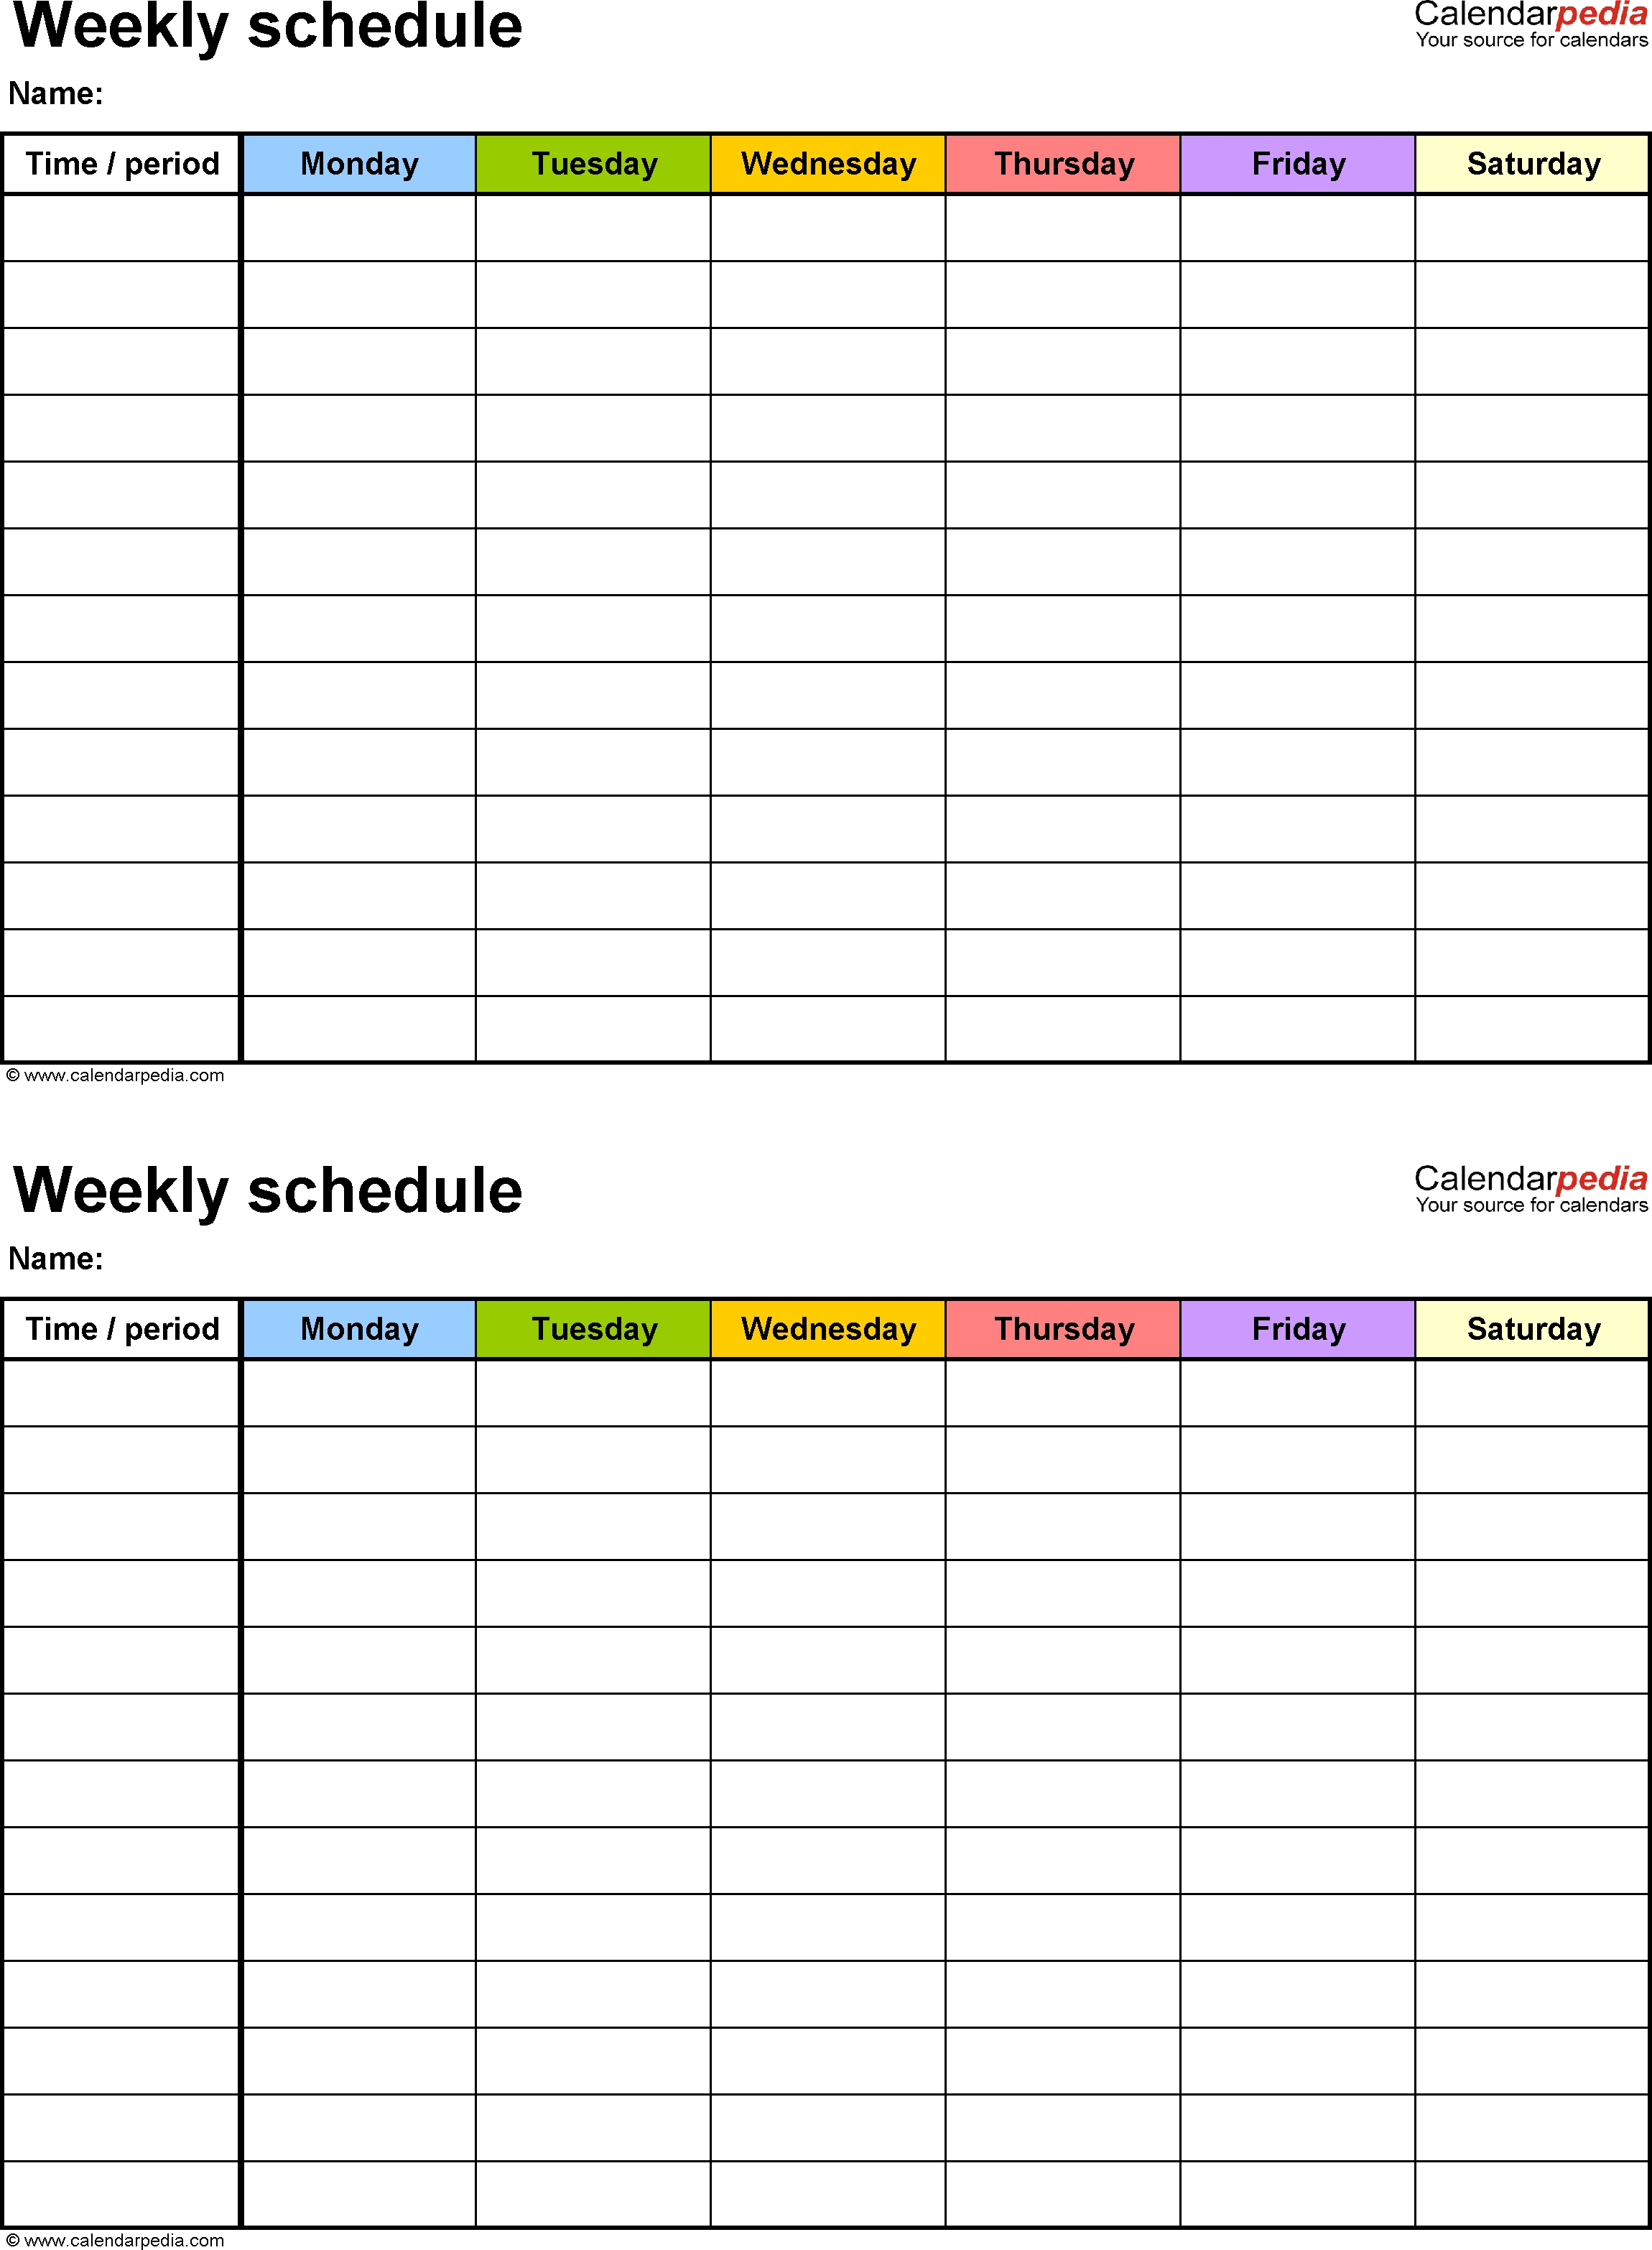 Free Weekly Schedule Templates For Word - 18 Templates  7 Day Calendar Template Fillable